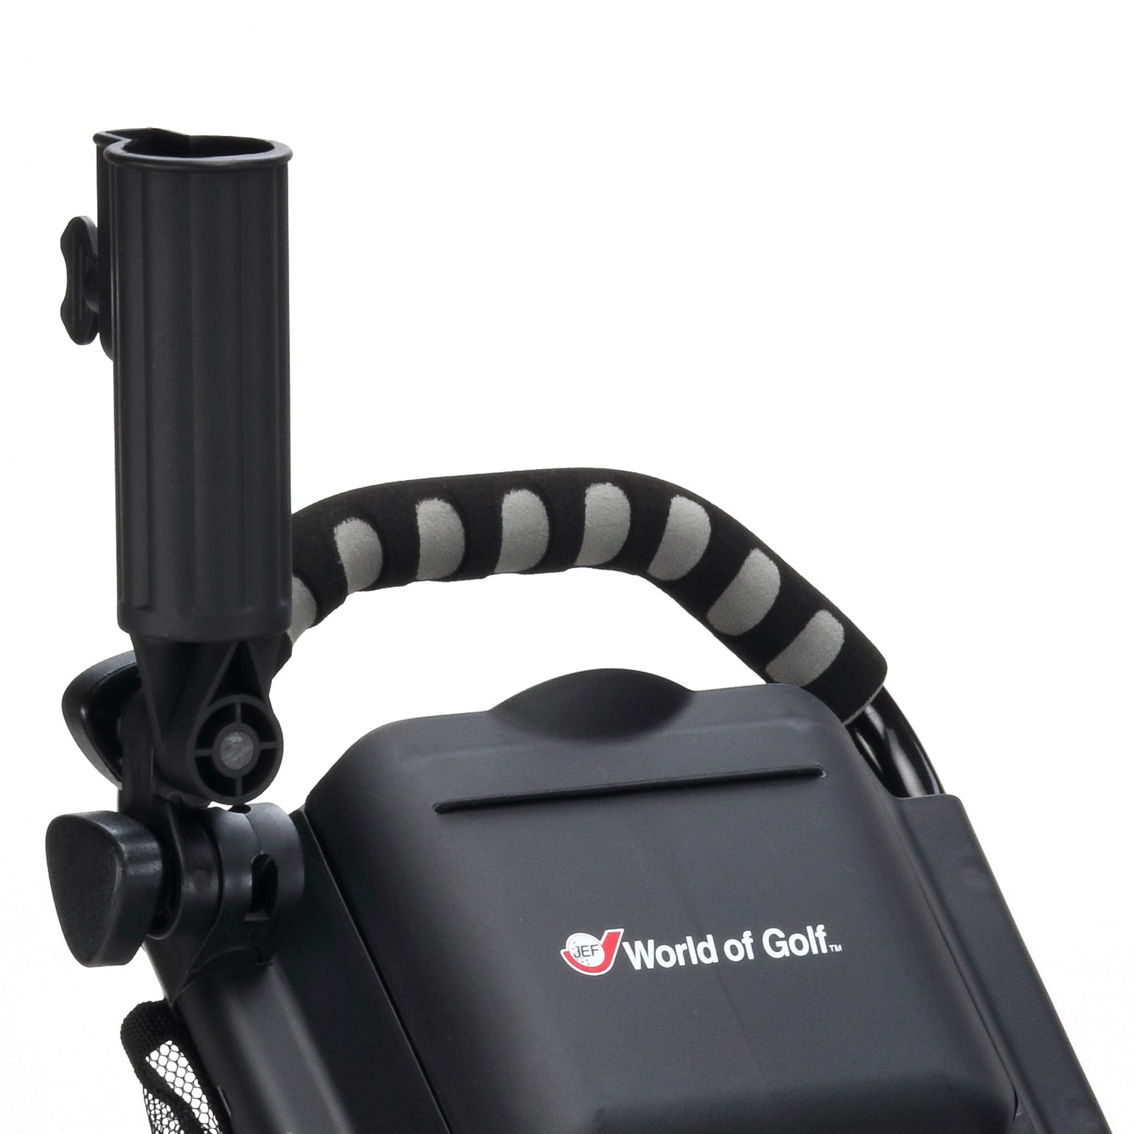 GOLF GIFTS & GALLERY EZ FOLD 360 BLACK CART - Image 3 of 5